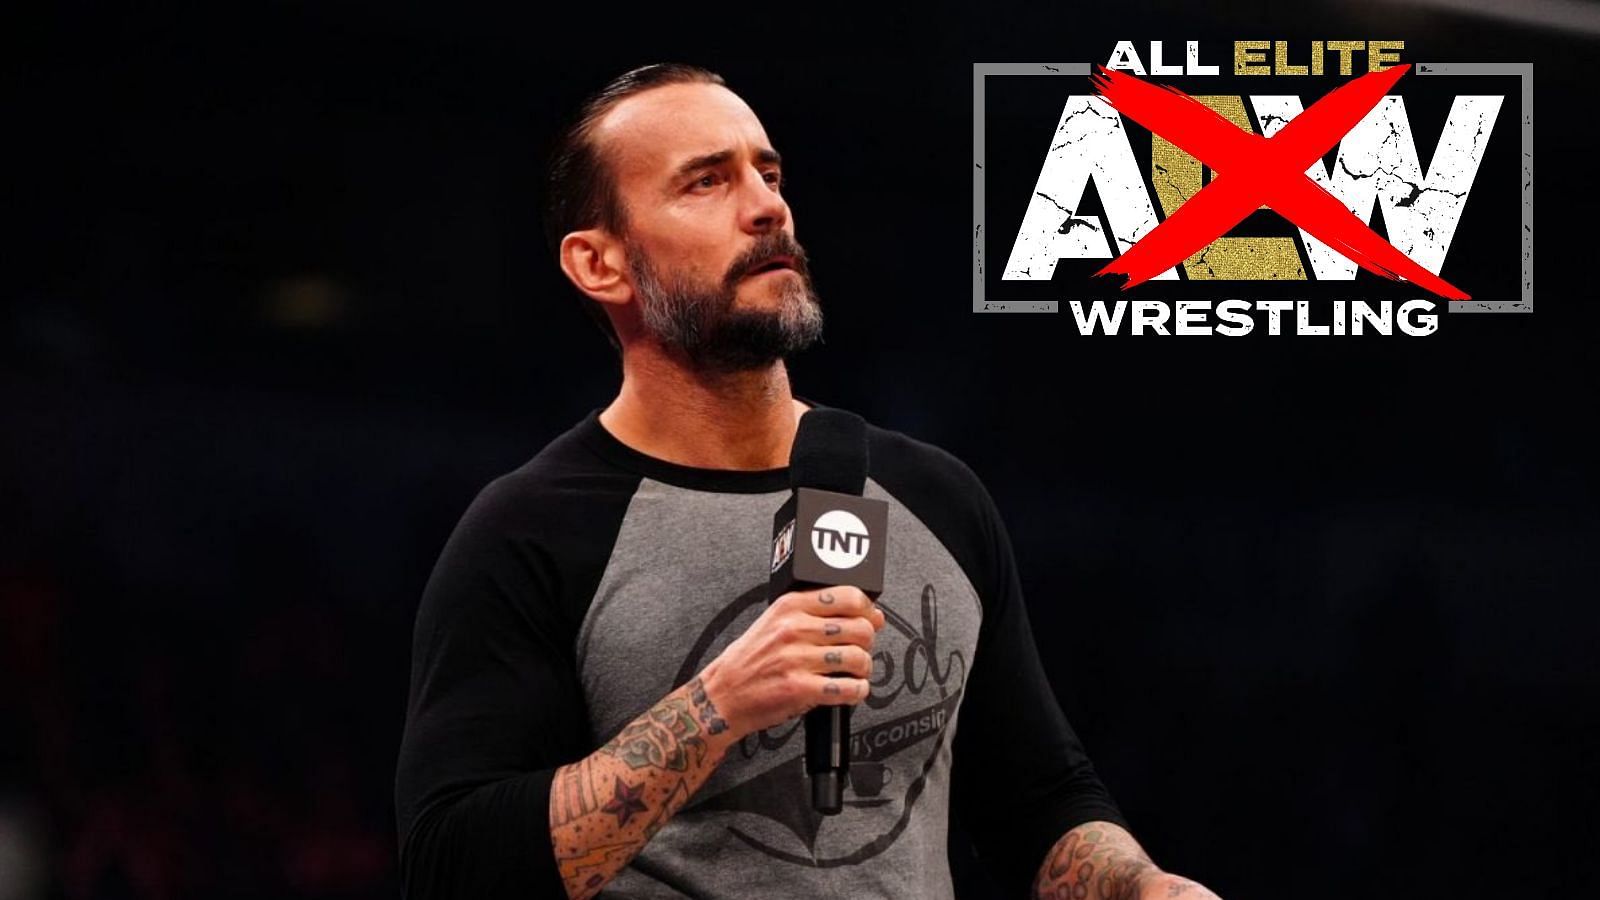 Could Punk permanently burn bridges with AEW?